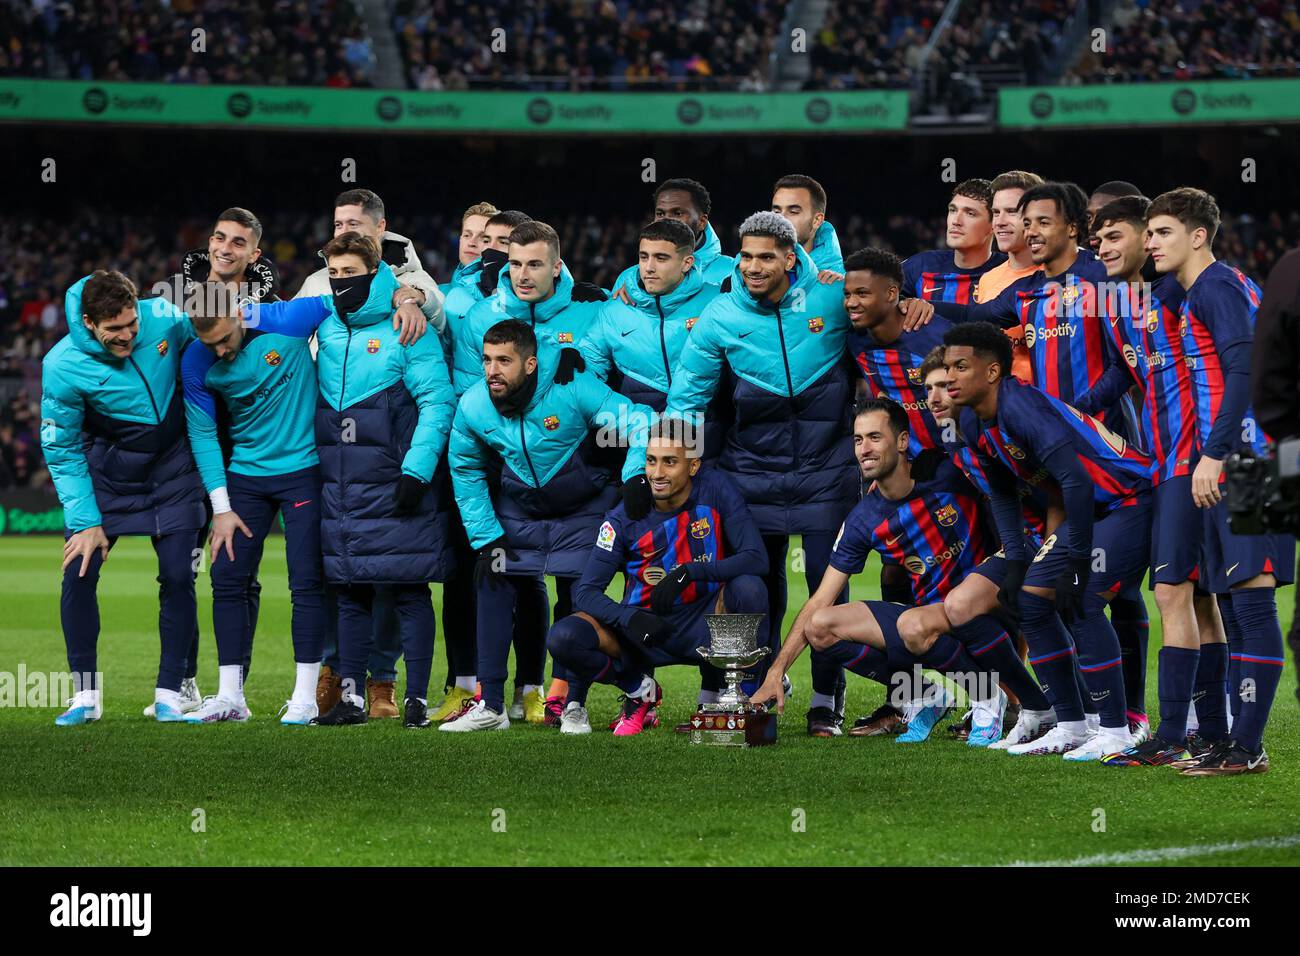 FC Barcelona players pose with the Super Copa trophy during the Liga match between FC Barcelona and Getafe CF at Spotify Camp Nou in Barcelona, Spain. Stock Photo